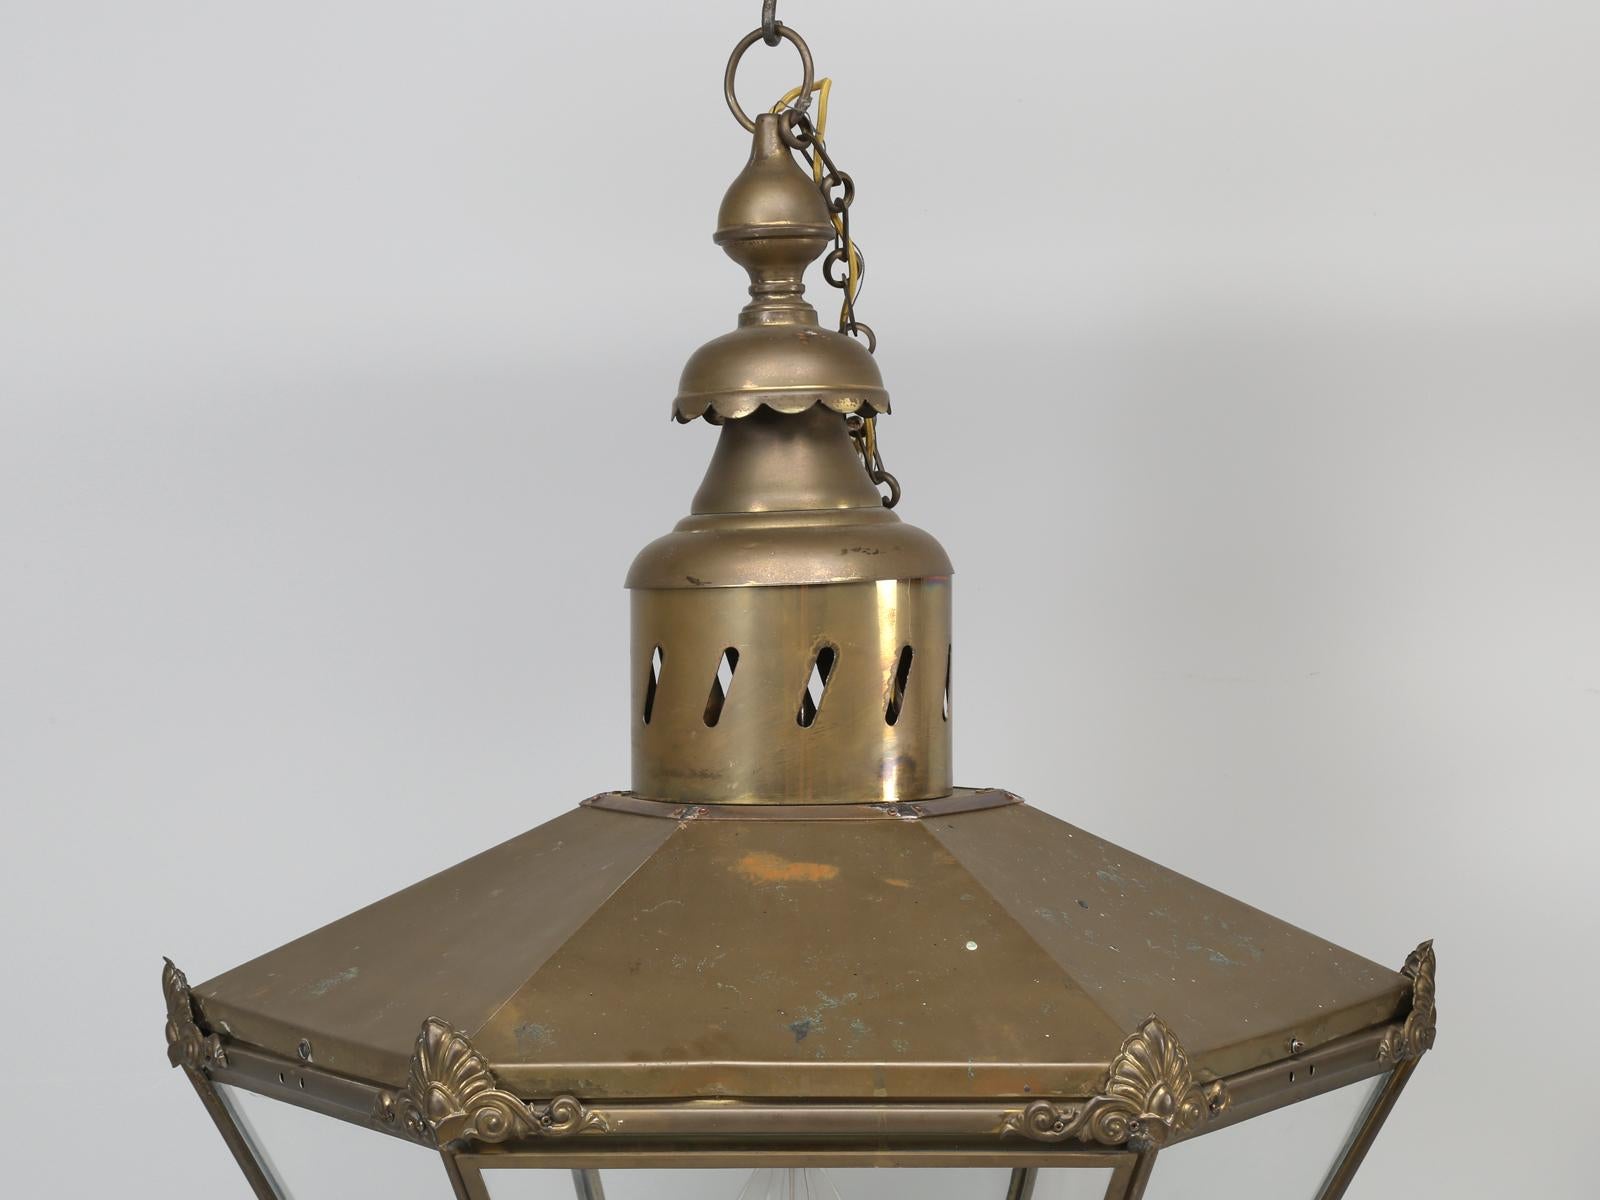 Antique French or English, very large brass lanterns. Although we purchased this brass lantern in France, there is a part of us, that thinks they could have originated in England? What we find most unusual about this pair of antique lanterns, other